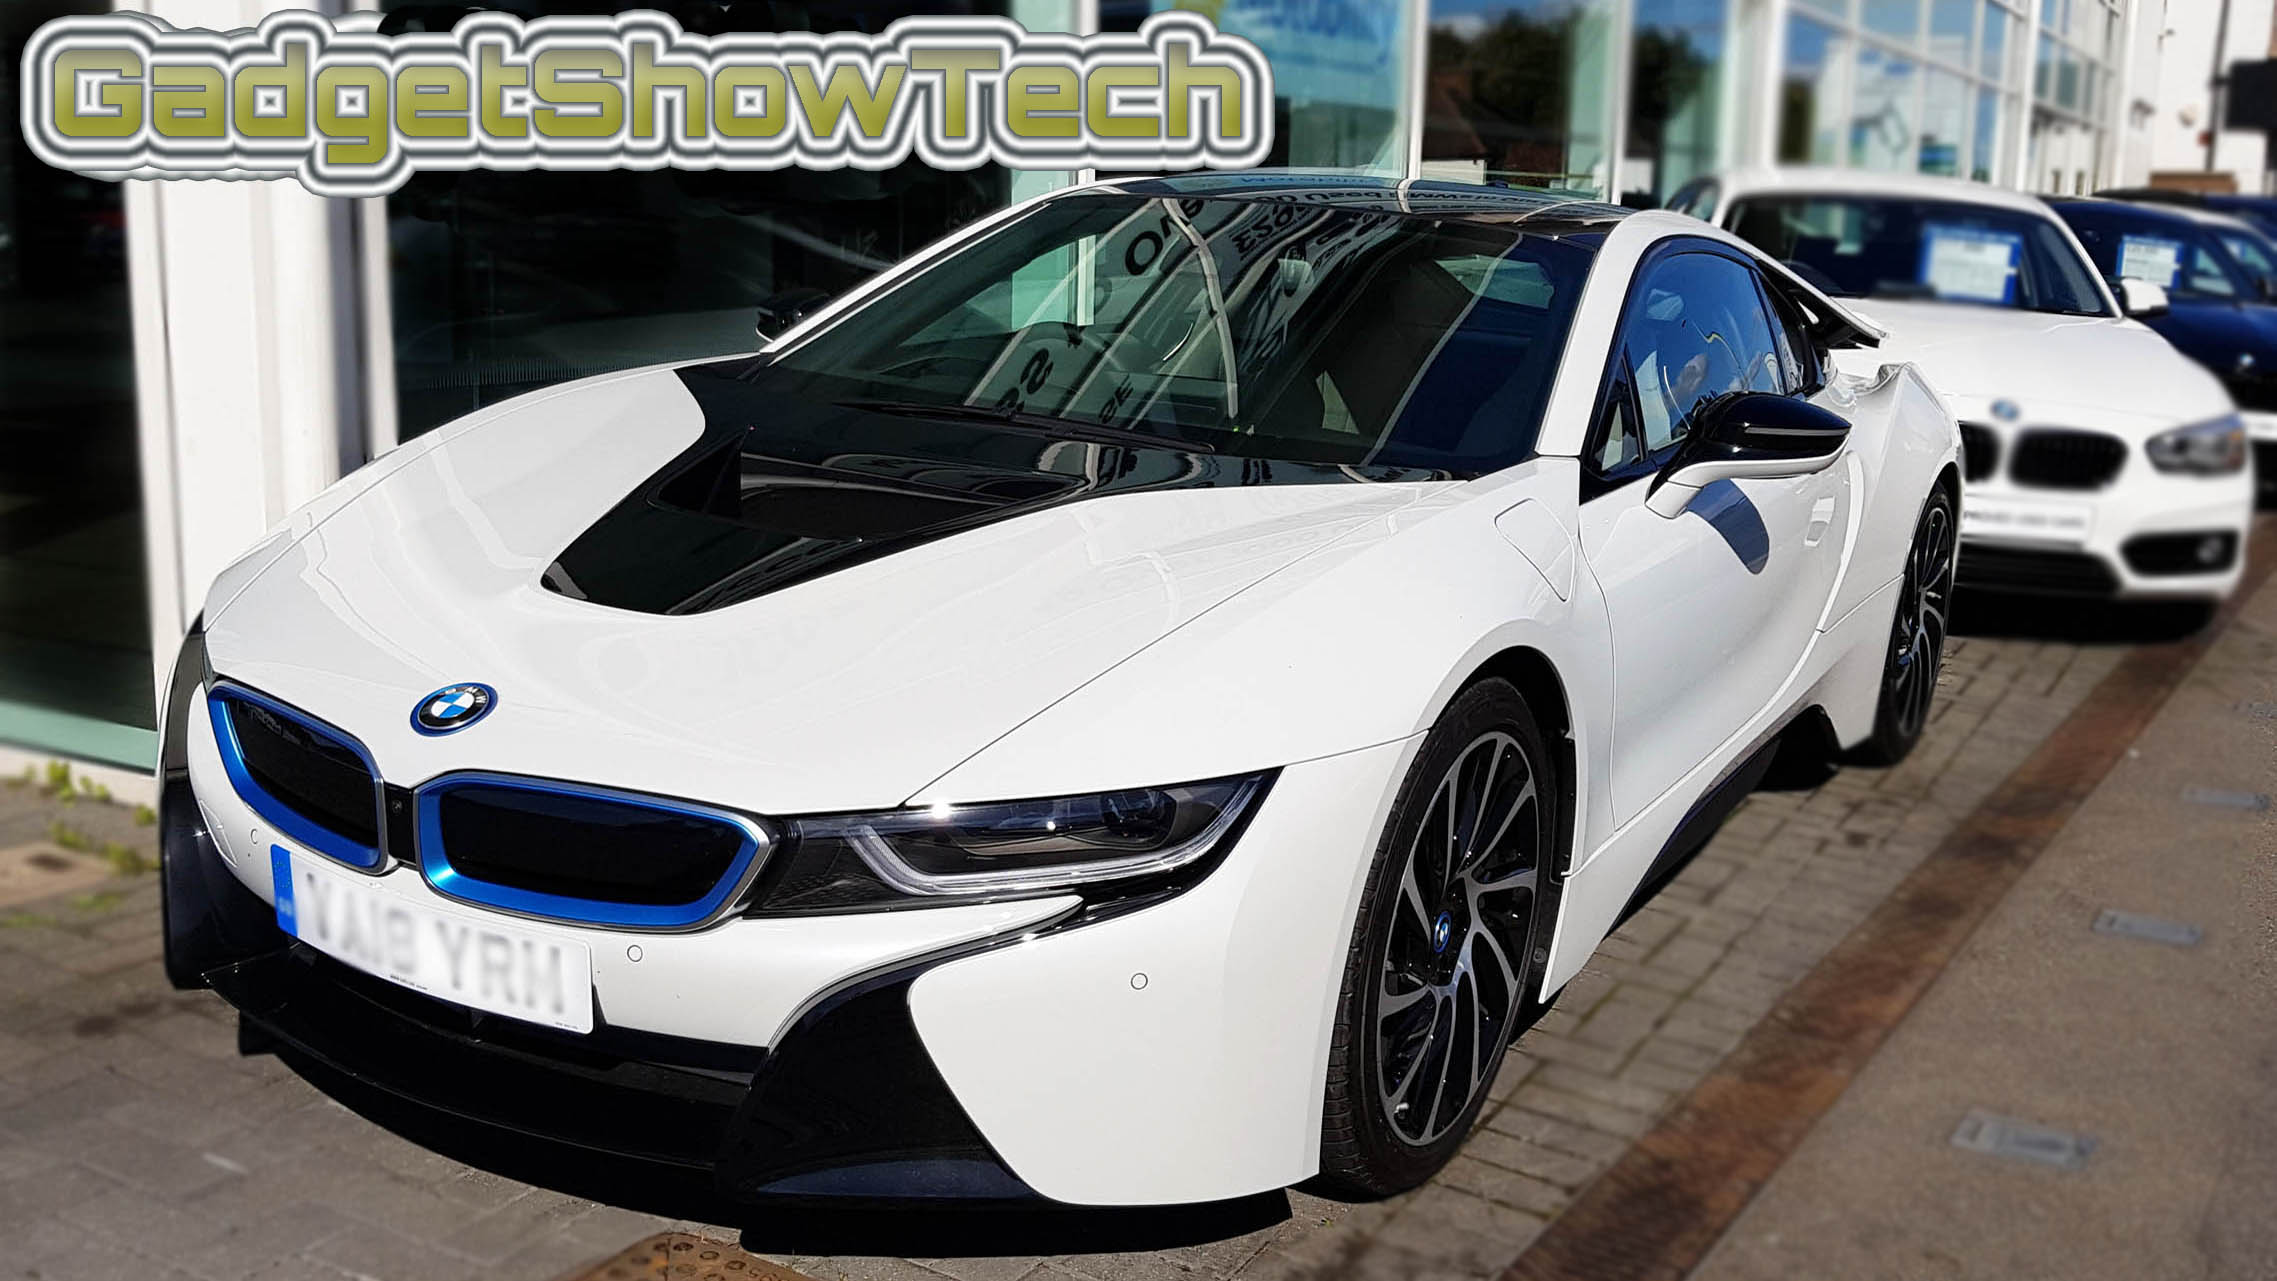 BMW i8 - 0 to 60 mph in 4.5 seconds